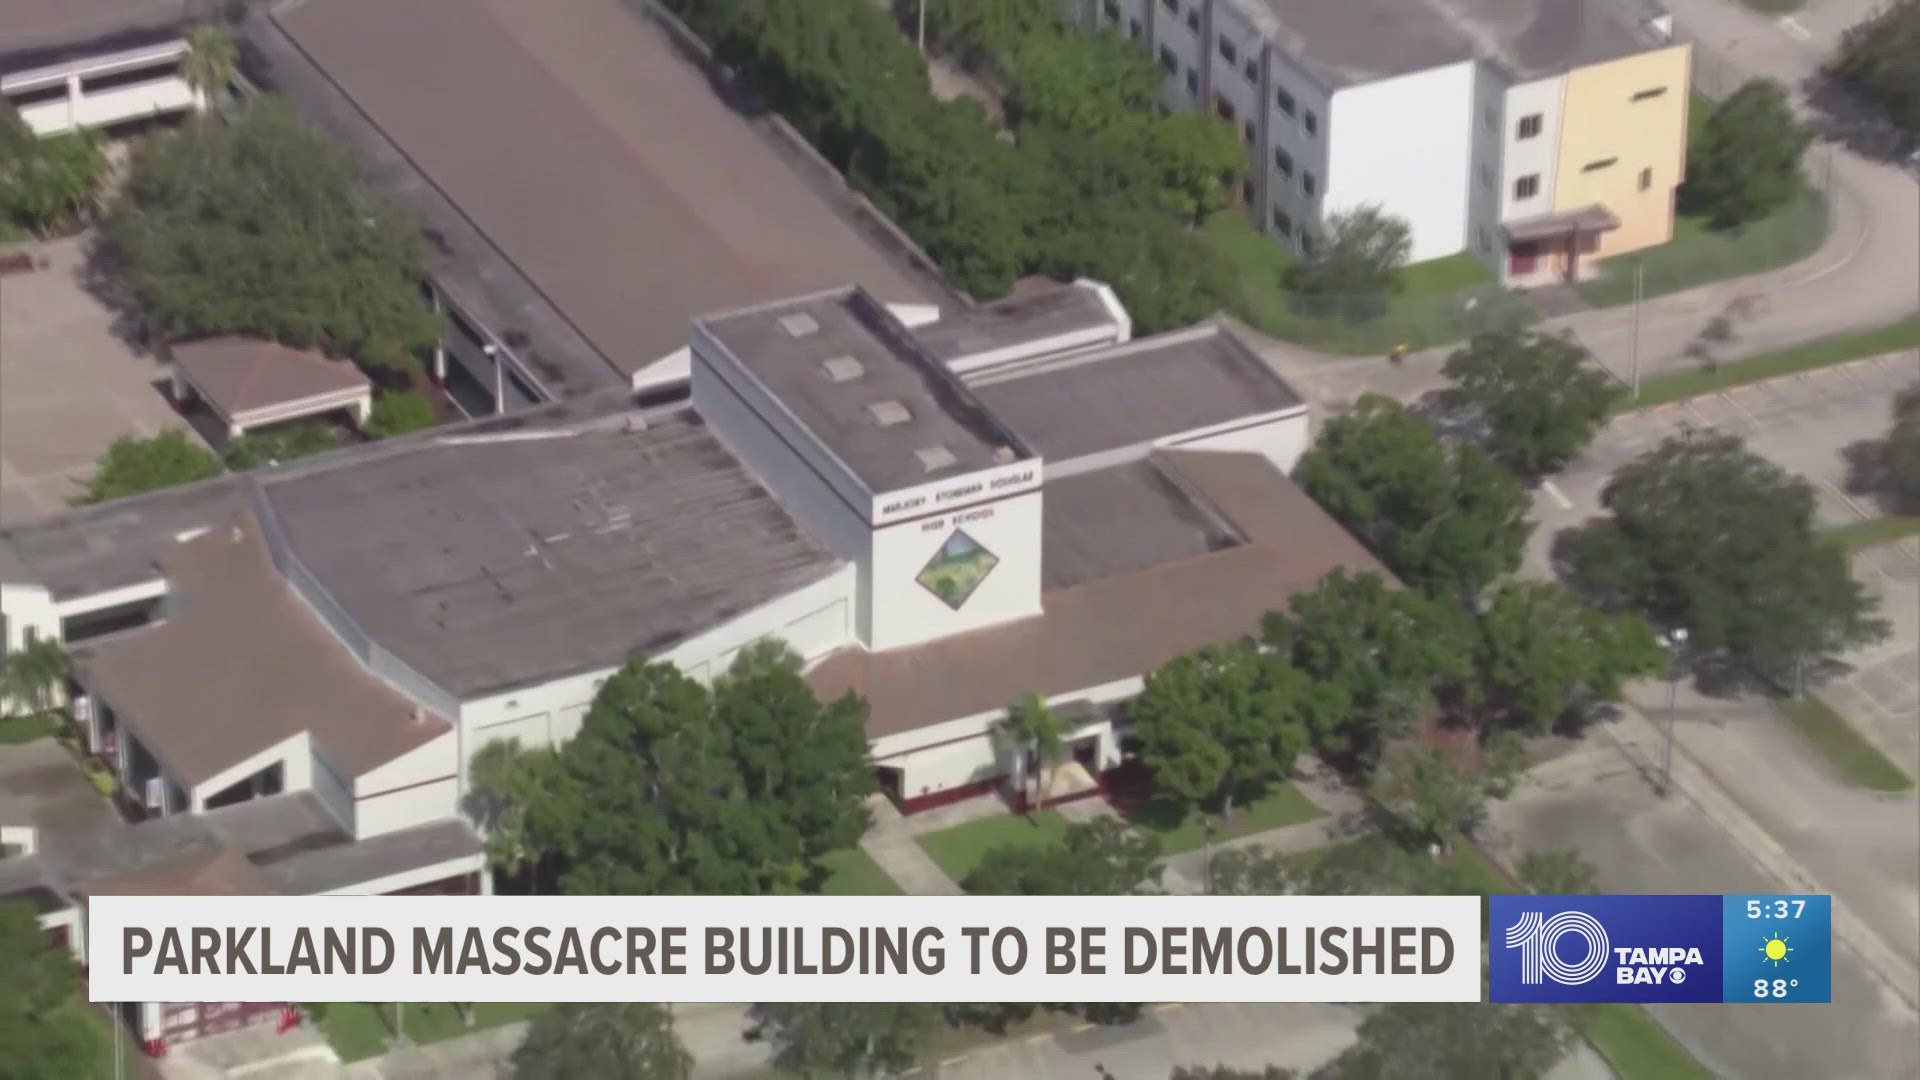 The specific building where the mass shooting took place will be demolished, not the entire school.